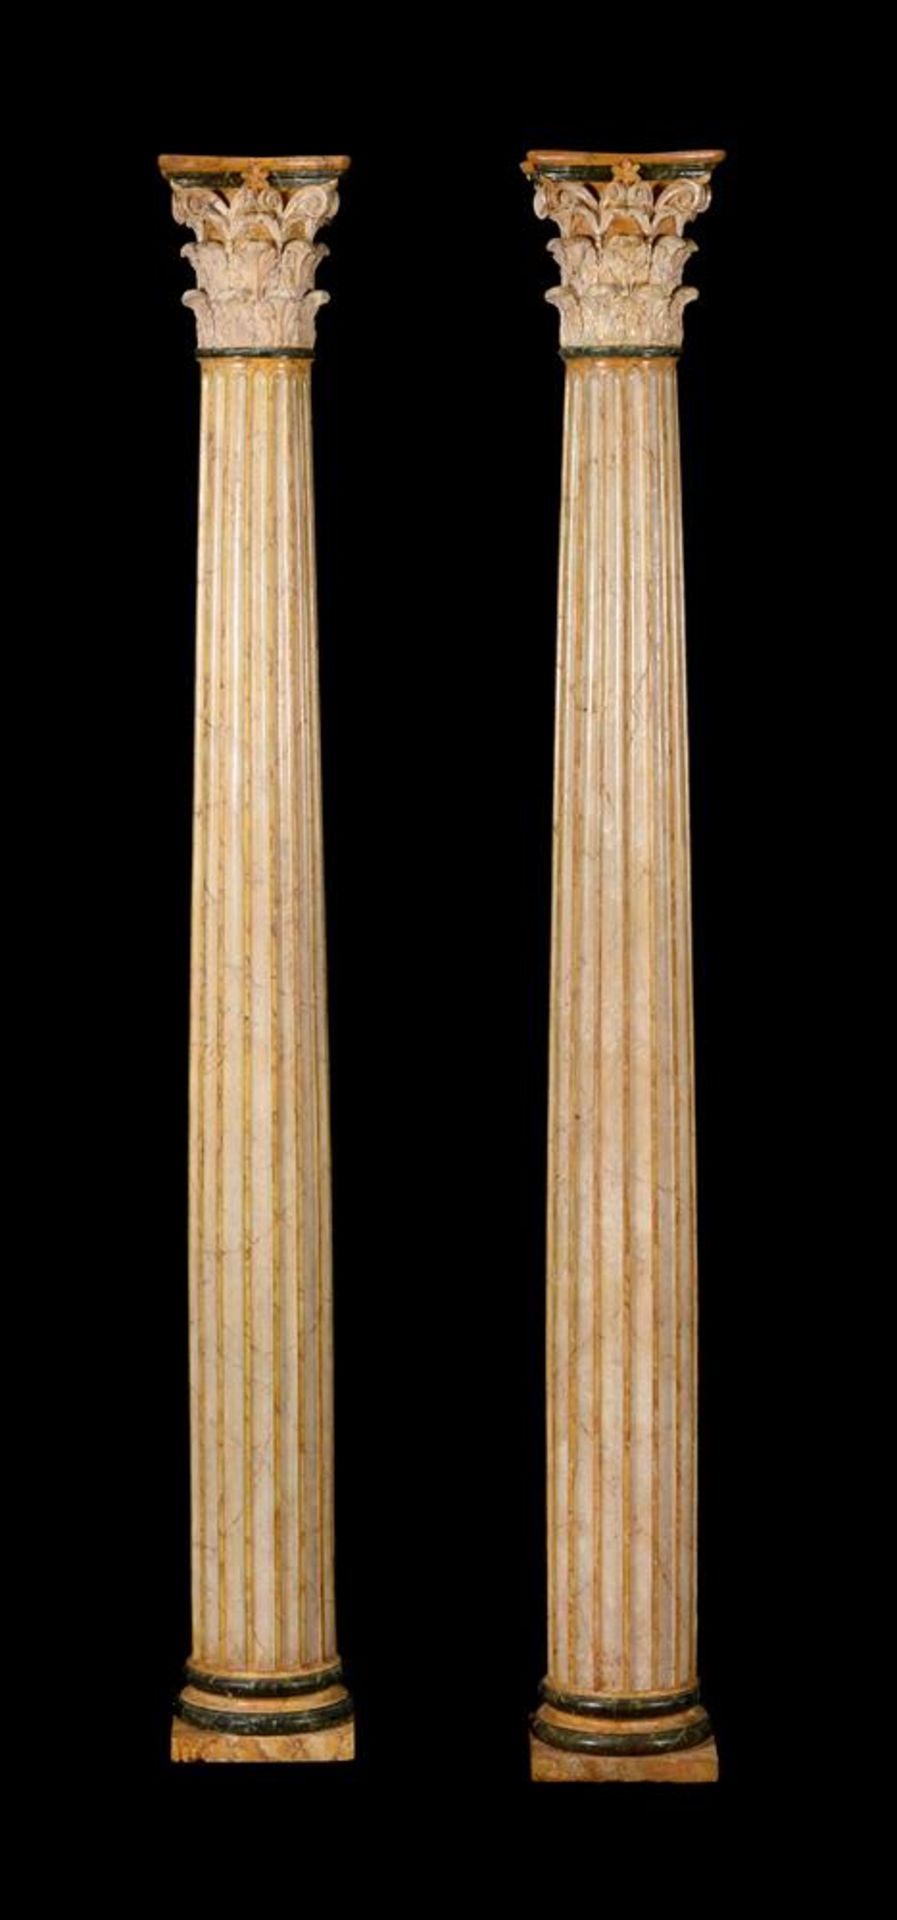 A PAIR OF PLASTER CORINTHIAN COLUMNS PAINTED TO SIMULATE MARBLE, 20TH CENTURY